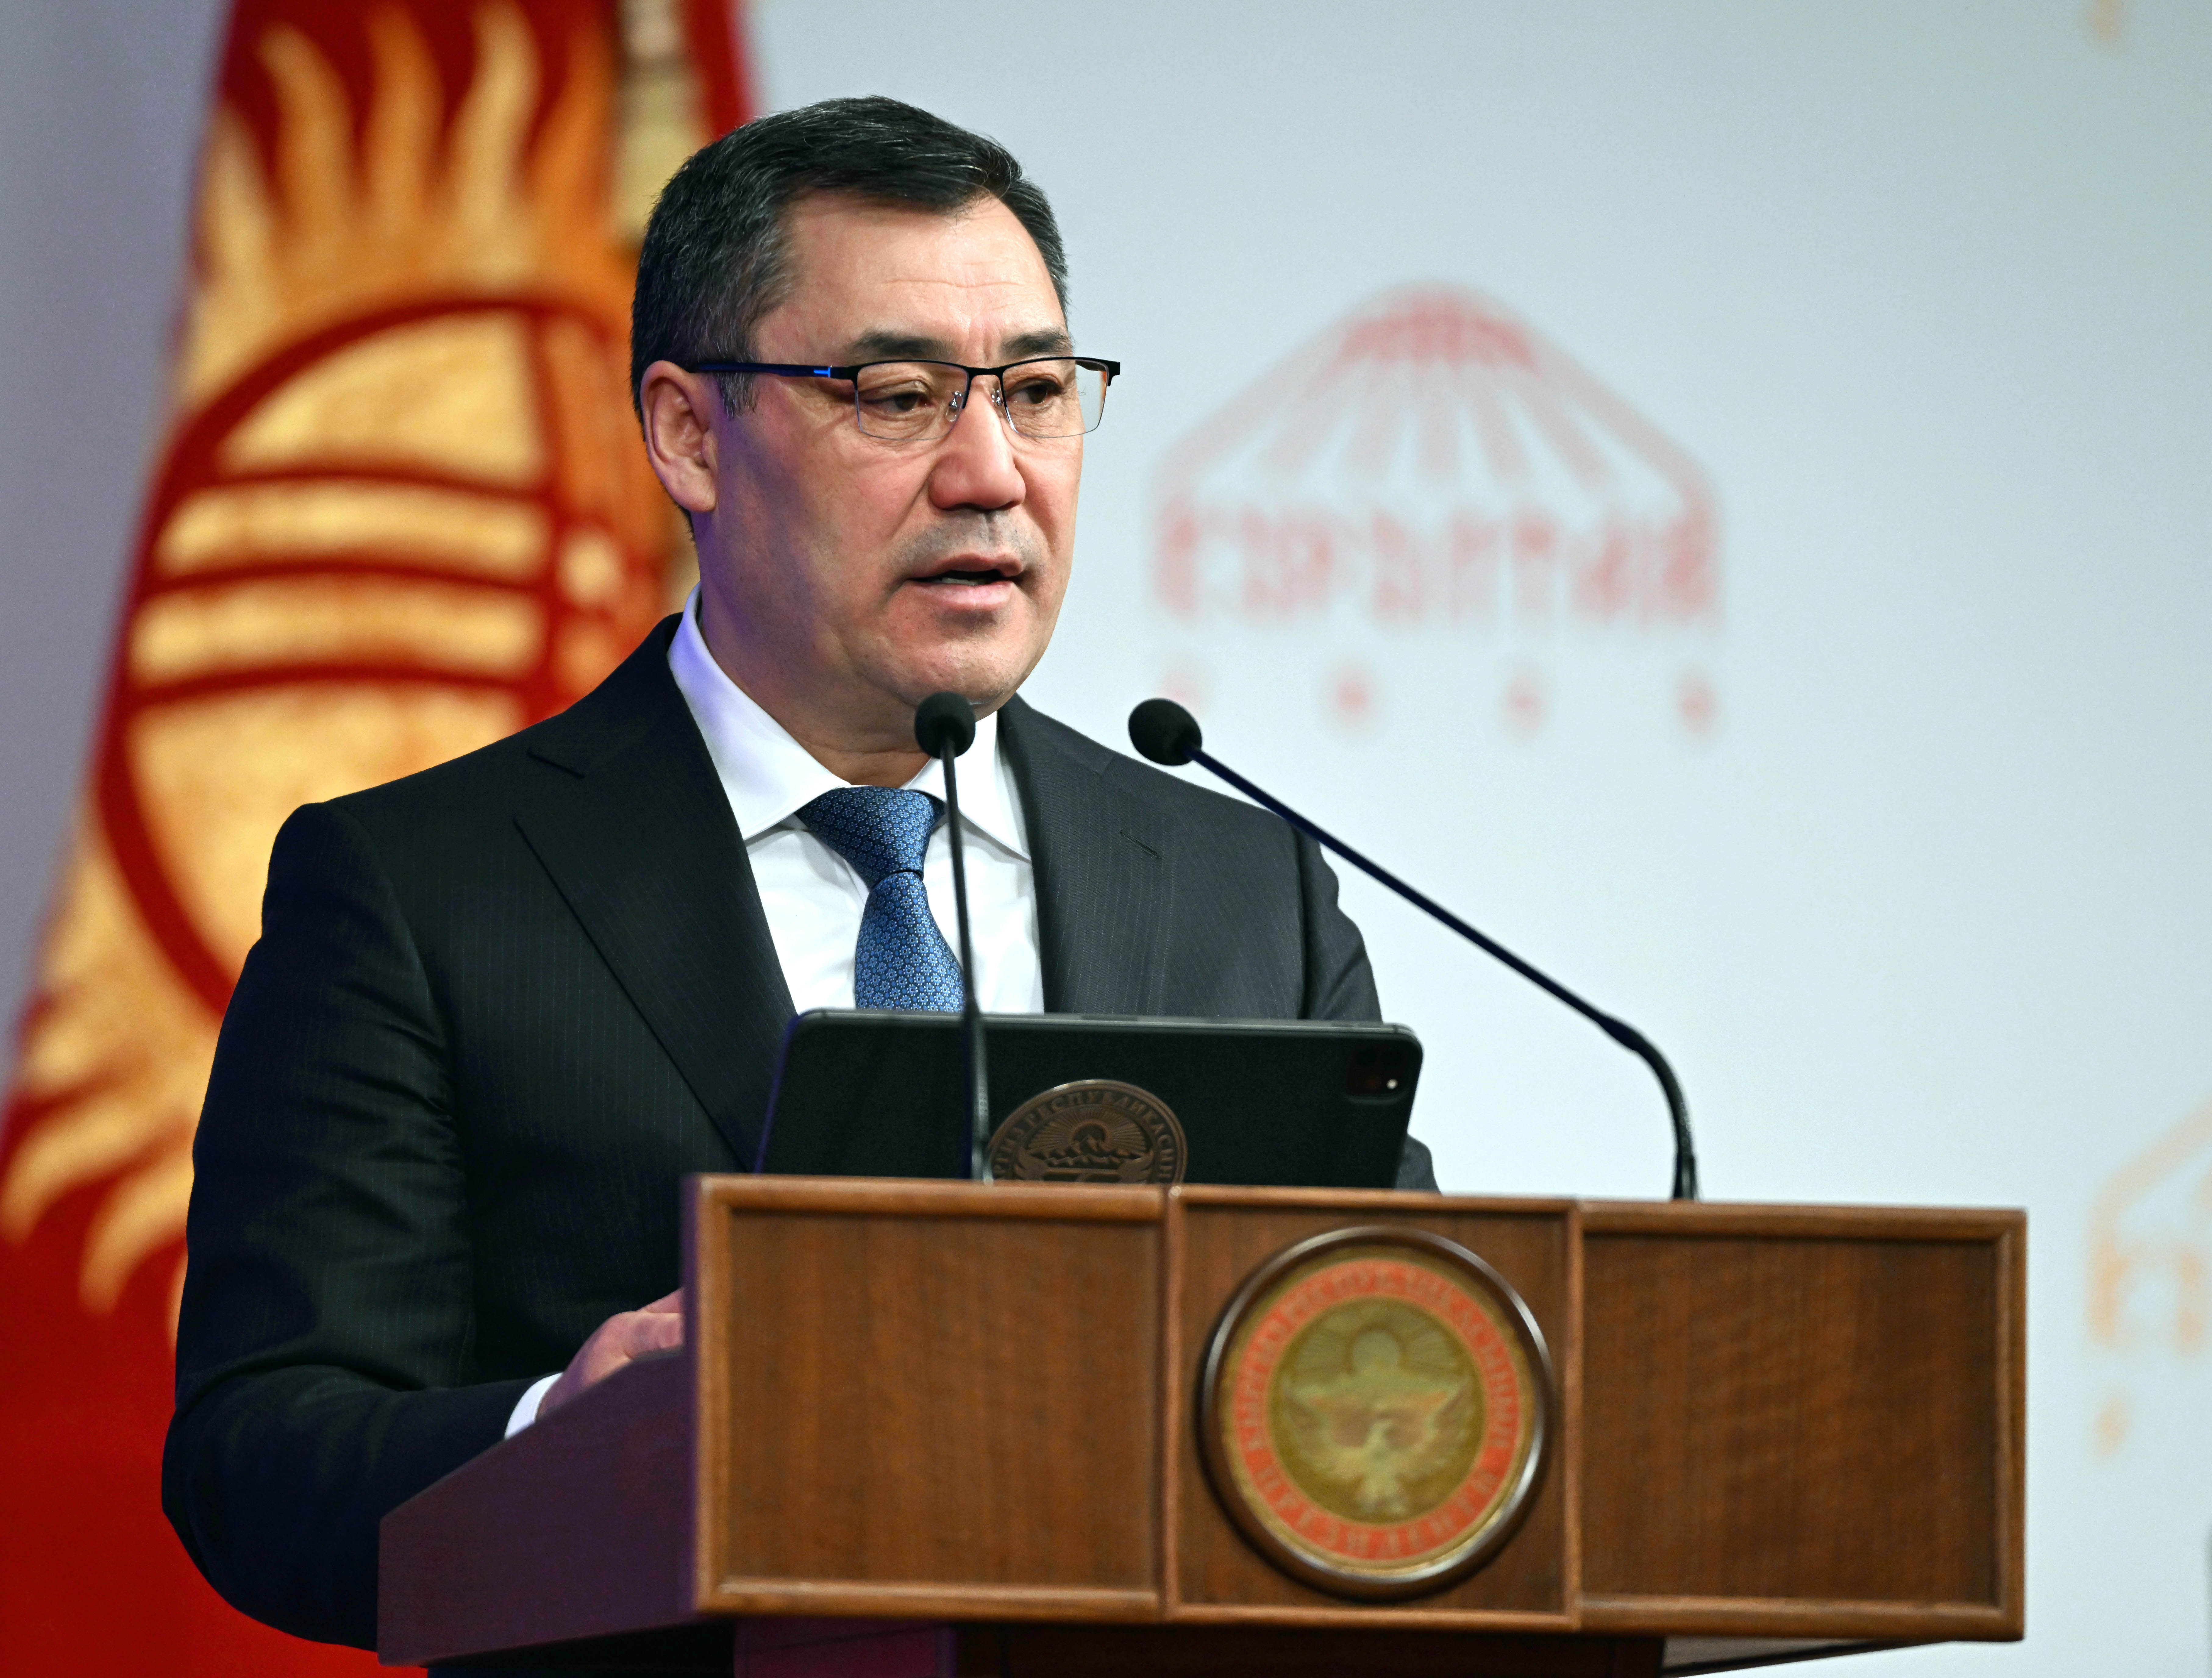 Kyrgyzstan eyes future investments for national projects such as hydroelectric power plants and industrial initiatives